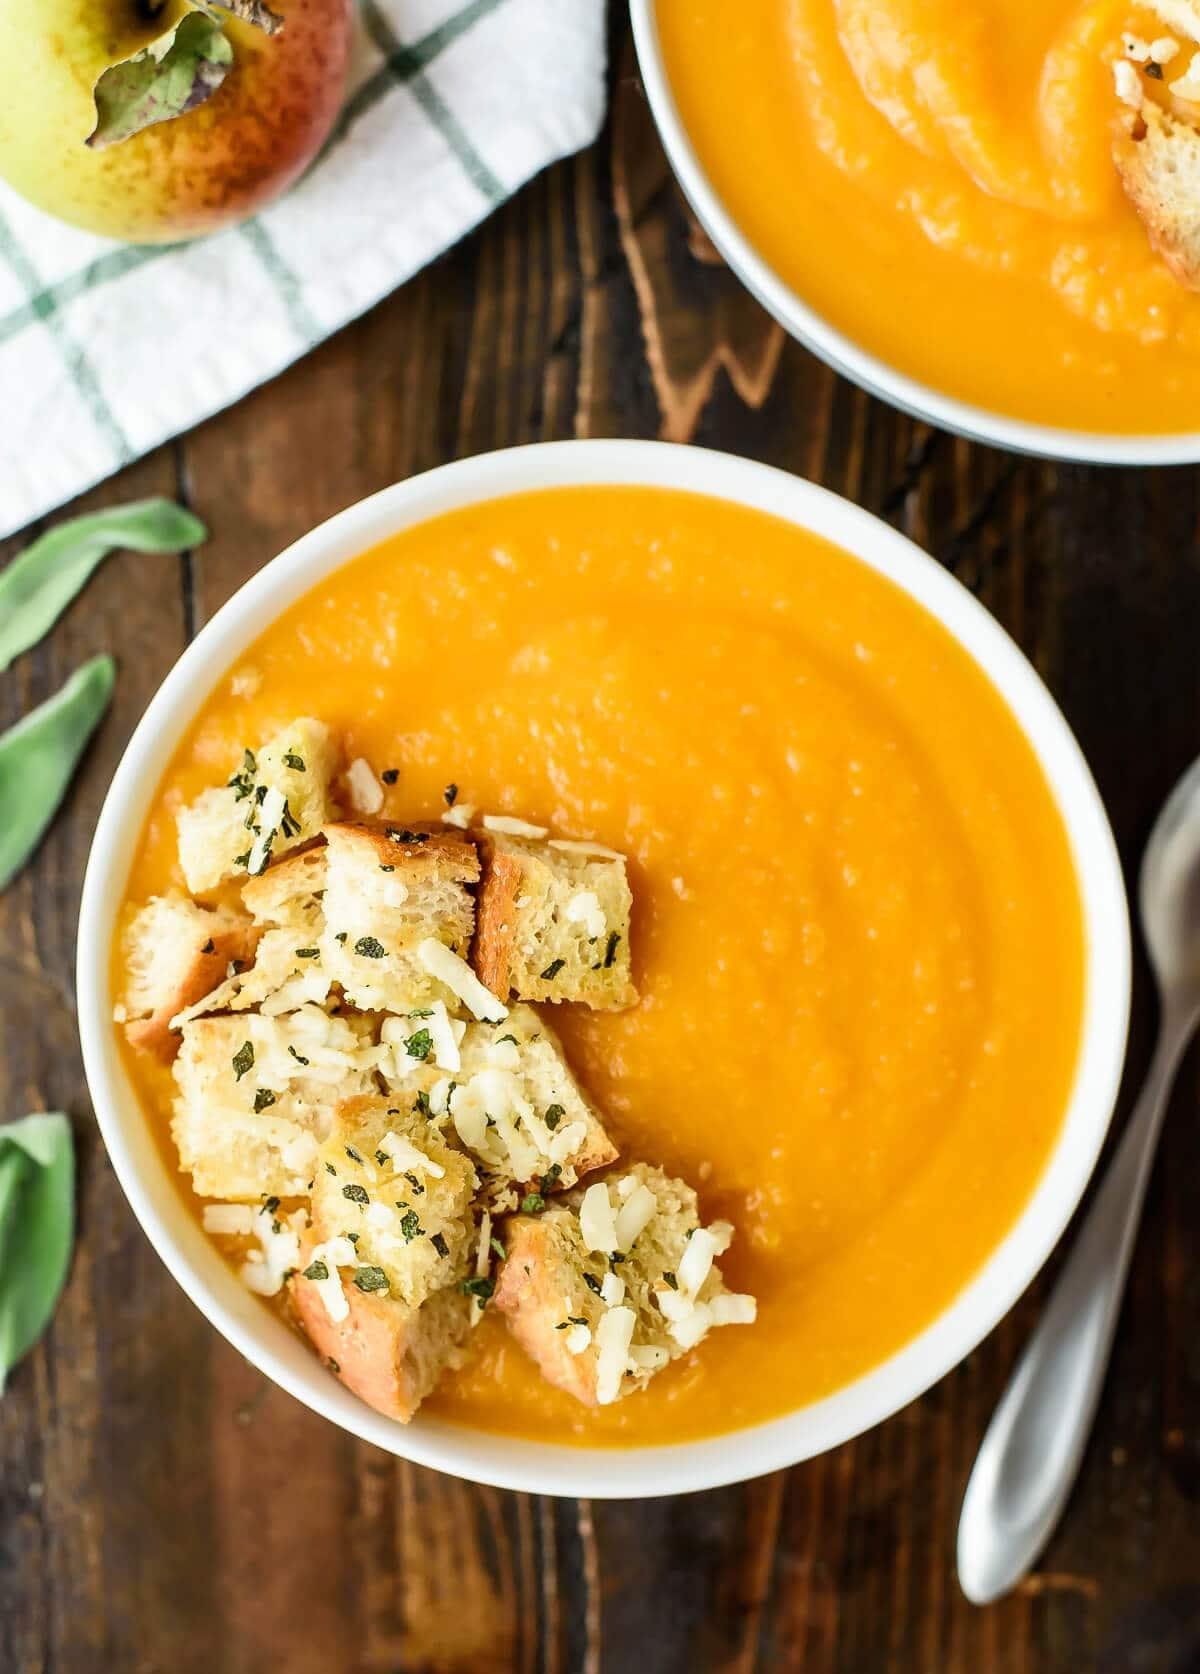 Flavorful Fall Soup: How to Make Creamy Butternut Squash and Apple Soup